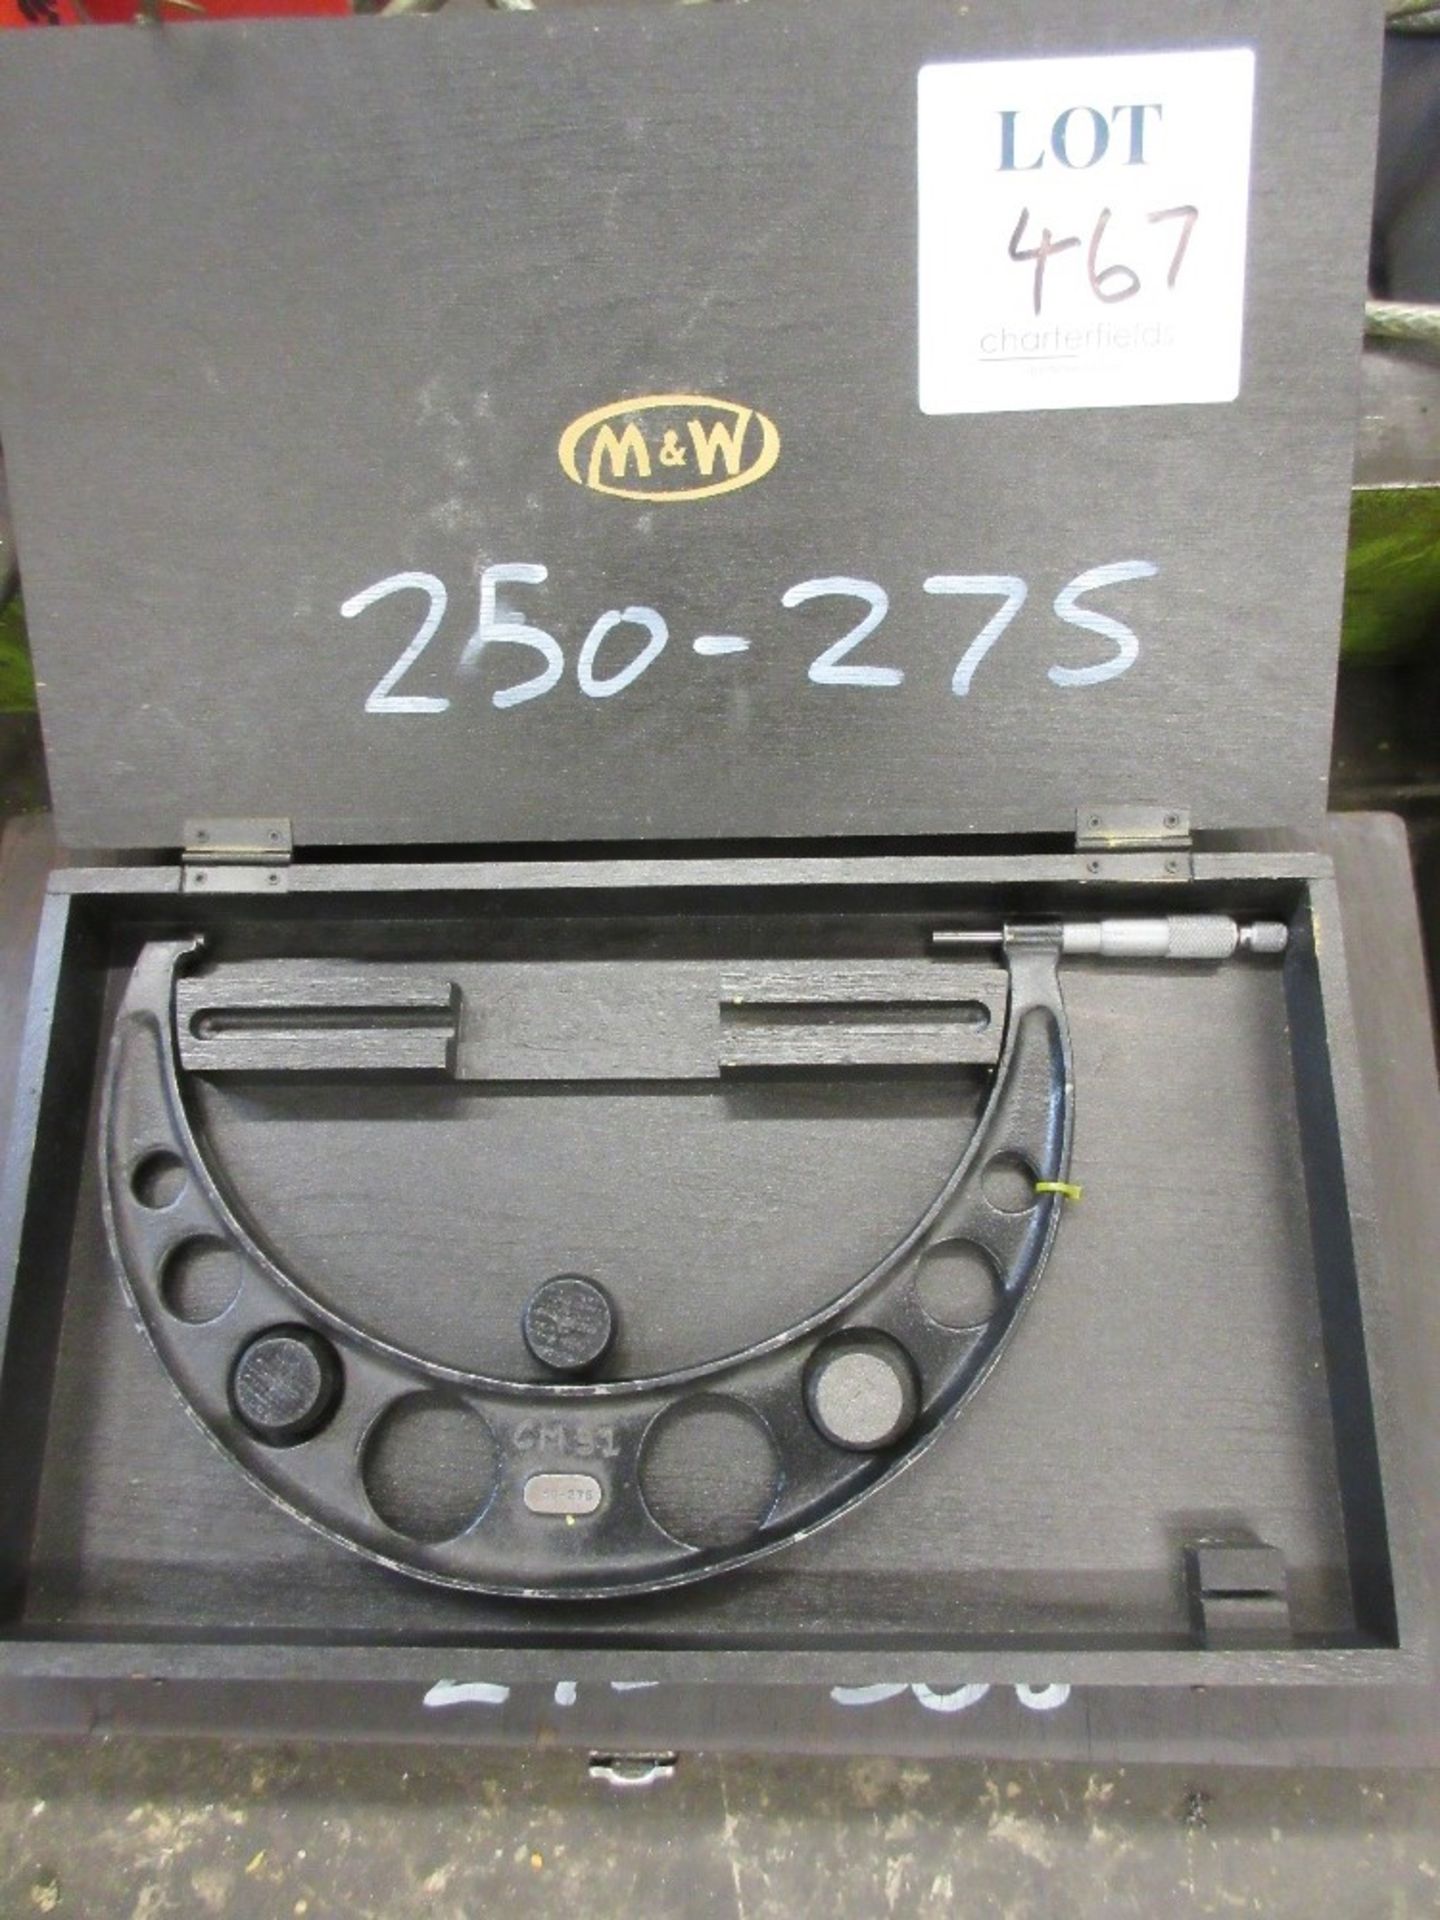 2 - micrometer set 250 - 275mm and 275 - 300mm